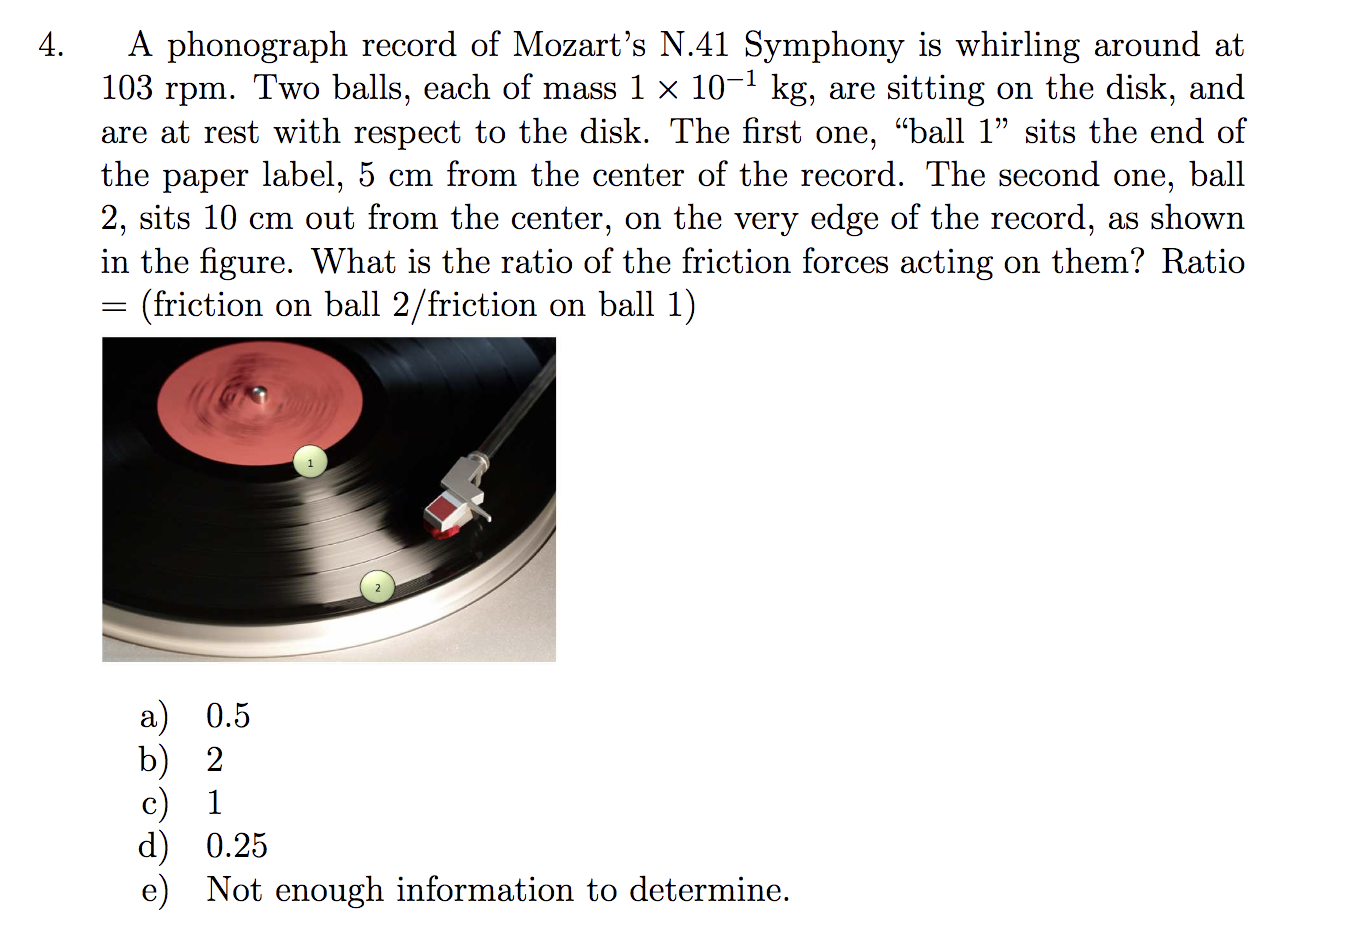 A phonograph record of Mozart's N.41 Symphony is whirling around at
103 rpm. Two balls, each of mass 1 × 10-1 kg, are sitting on the disk, and
are at rest with respect to the disk. The first one, "ball 1" sits the end of
the paper label, 5 cm from the center of the record. The second one,
2, sits 10 cm out from the center, on the very edge of the record, as shown
in the figure. What is the ratio of the friction forces acting on them? Ratio
= (friction on ball 2/friction on ball 1)
ball
a) 0.5
b) 2
c) 1
d) 0.25
e) Not enough information to determine.
4.
